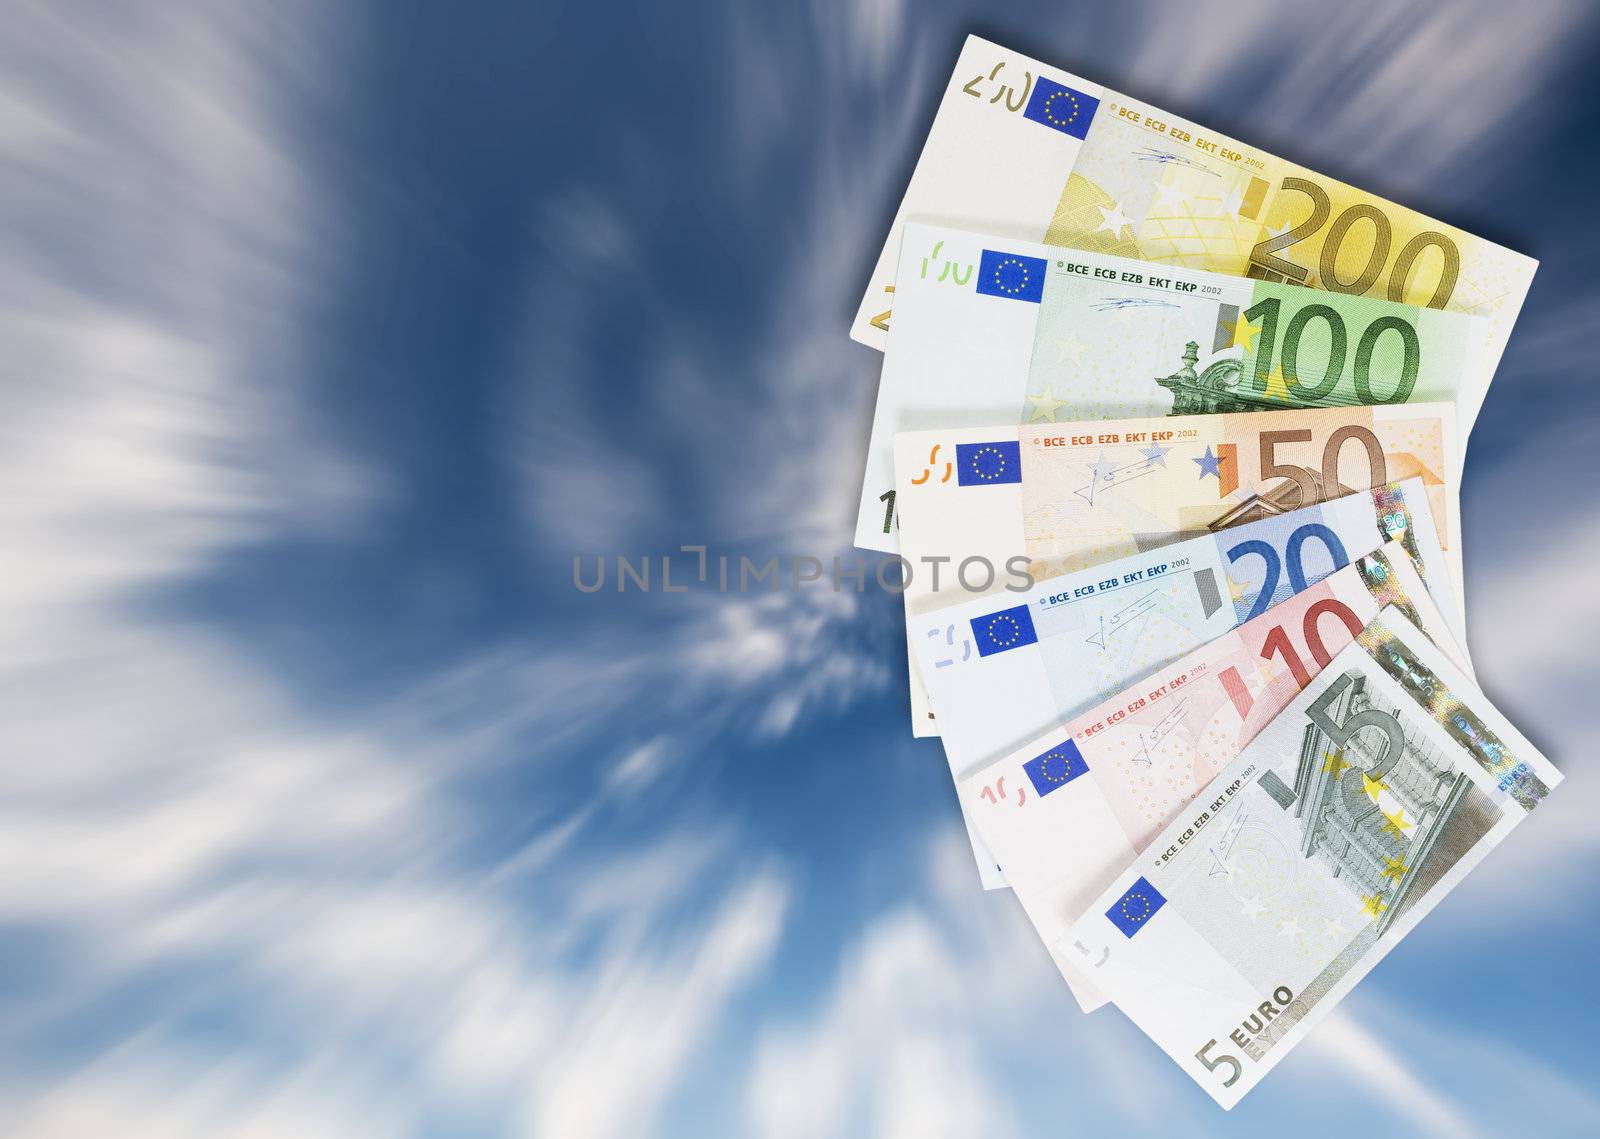 Shot of an assortment of Euro currency banknotes: 200, 100, 50, 20, 10, 5.

Studio shot.